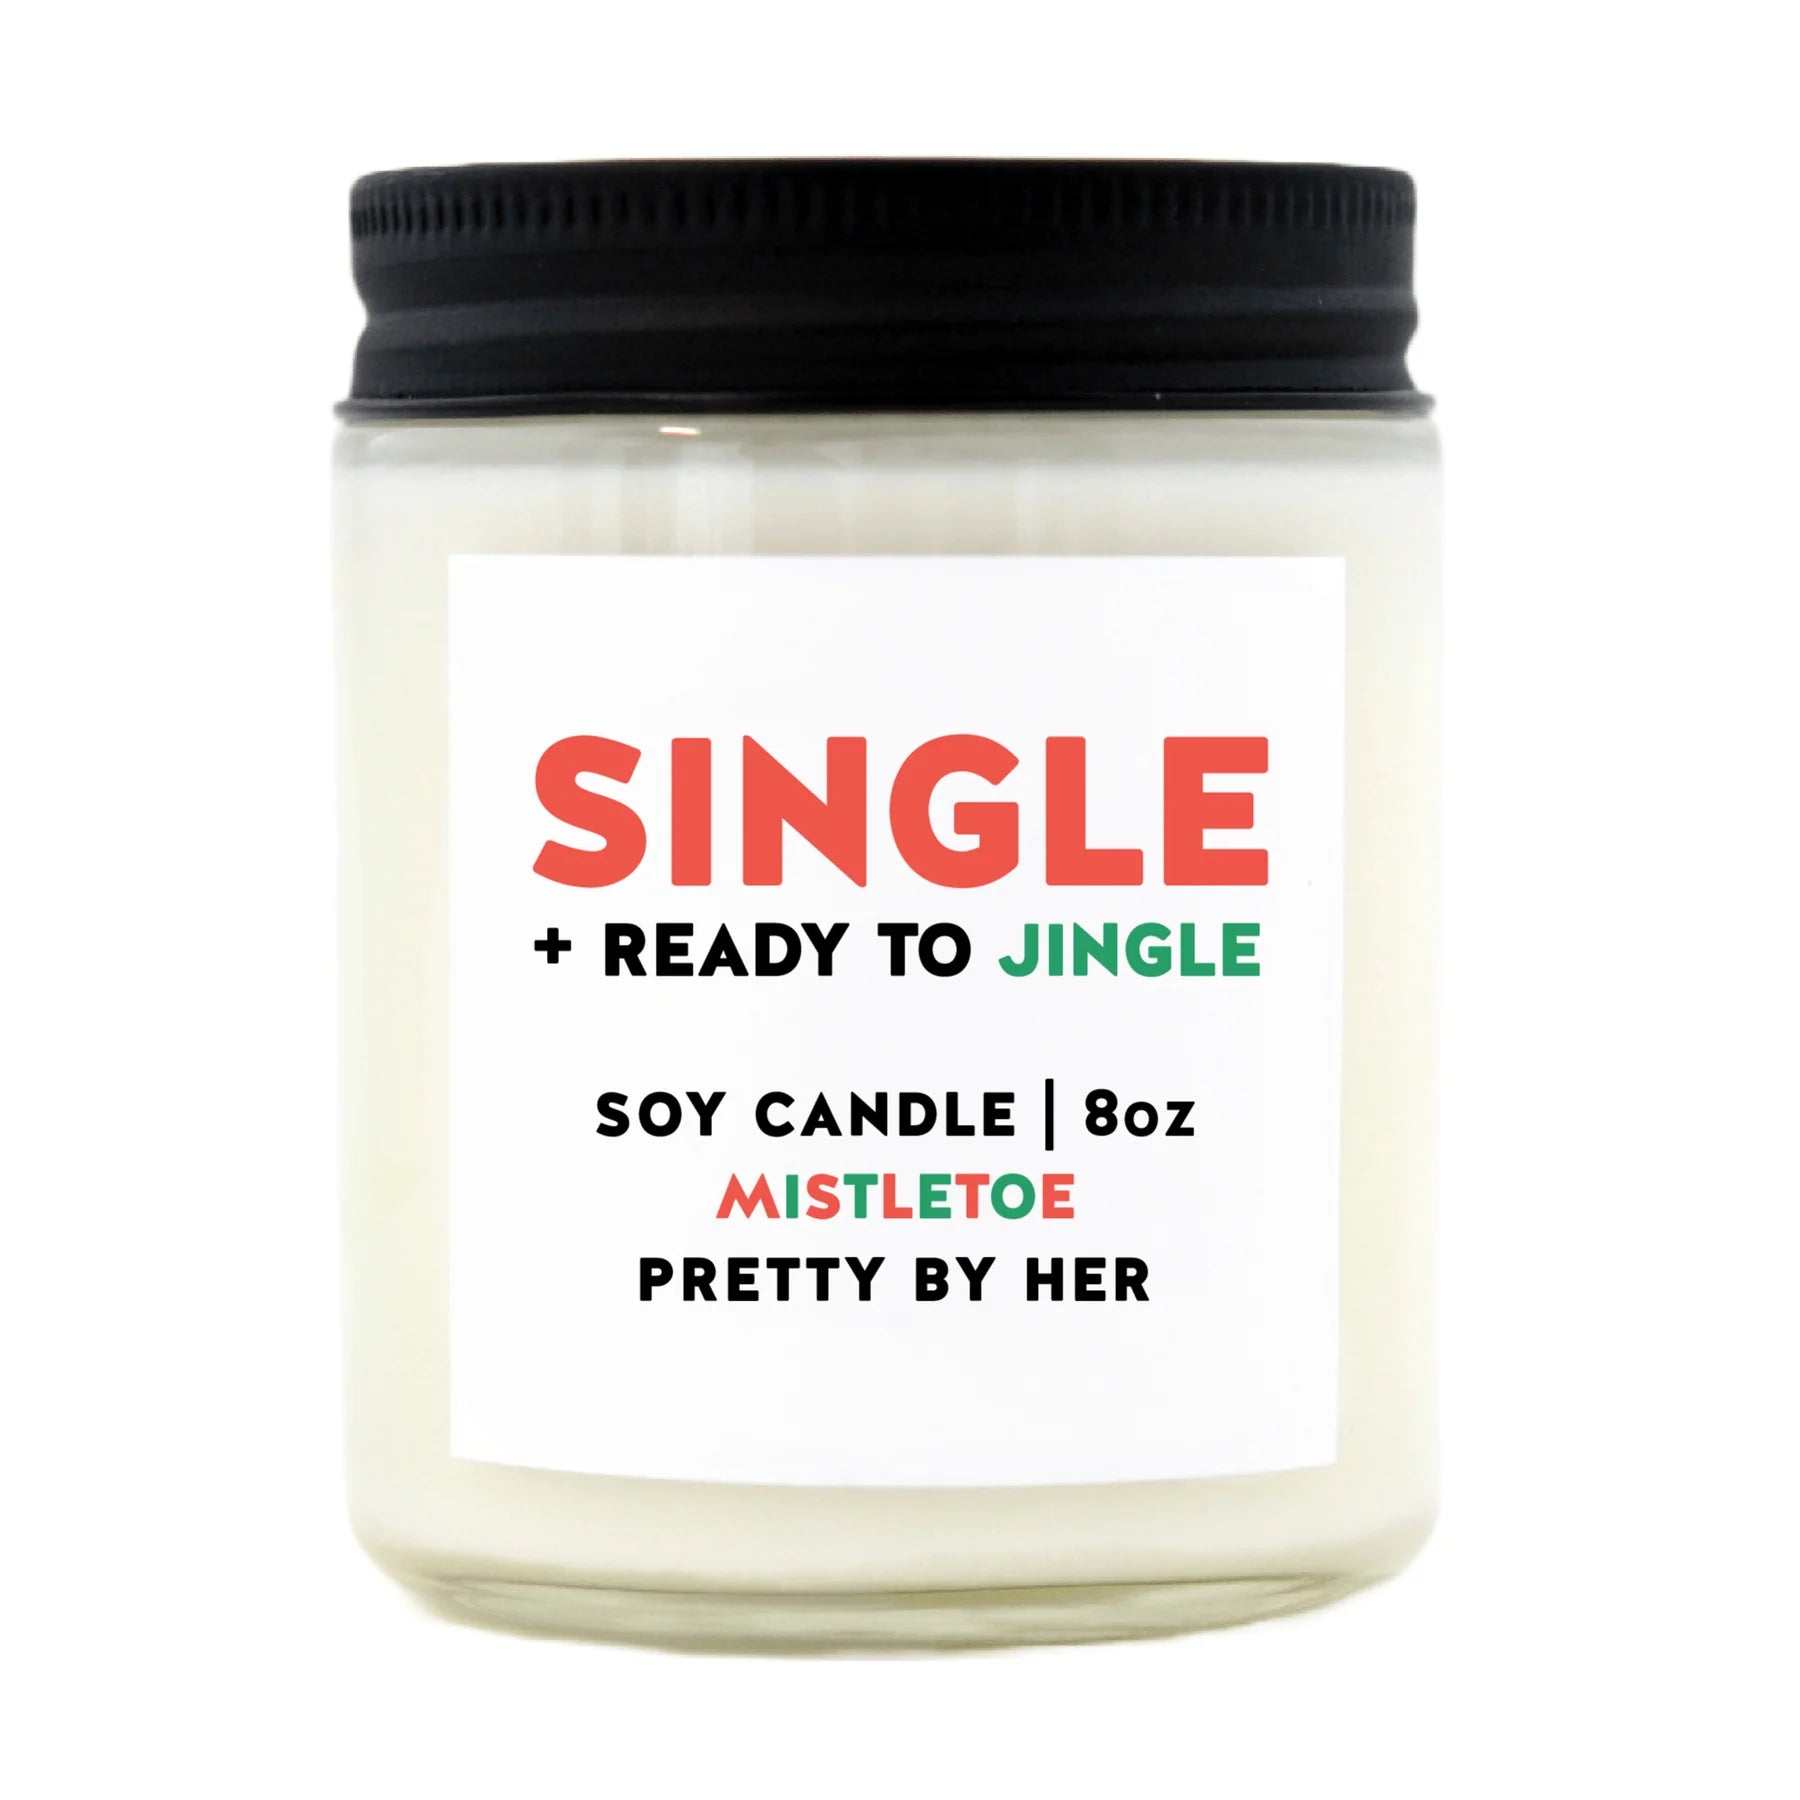 SINGLE AND READY TO JINGLE Candle